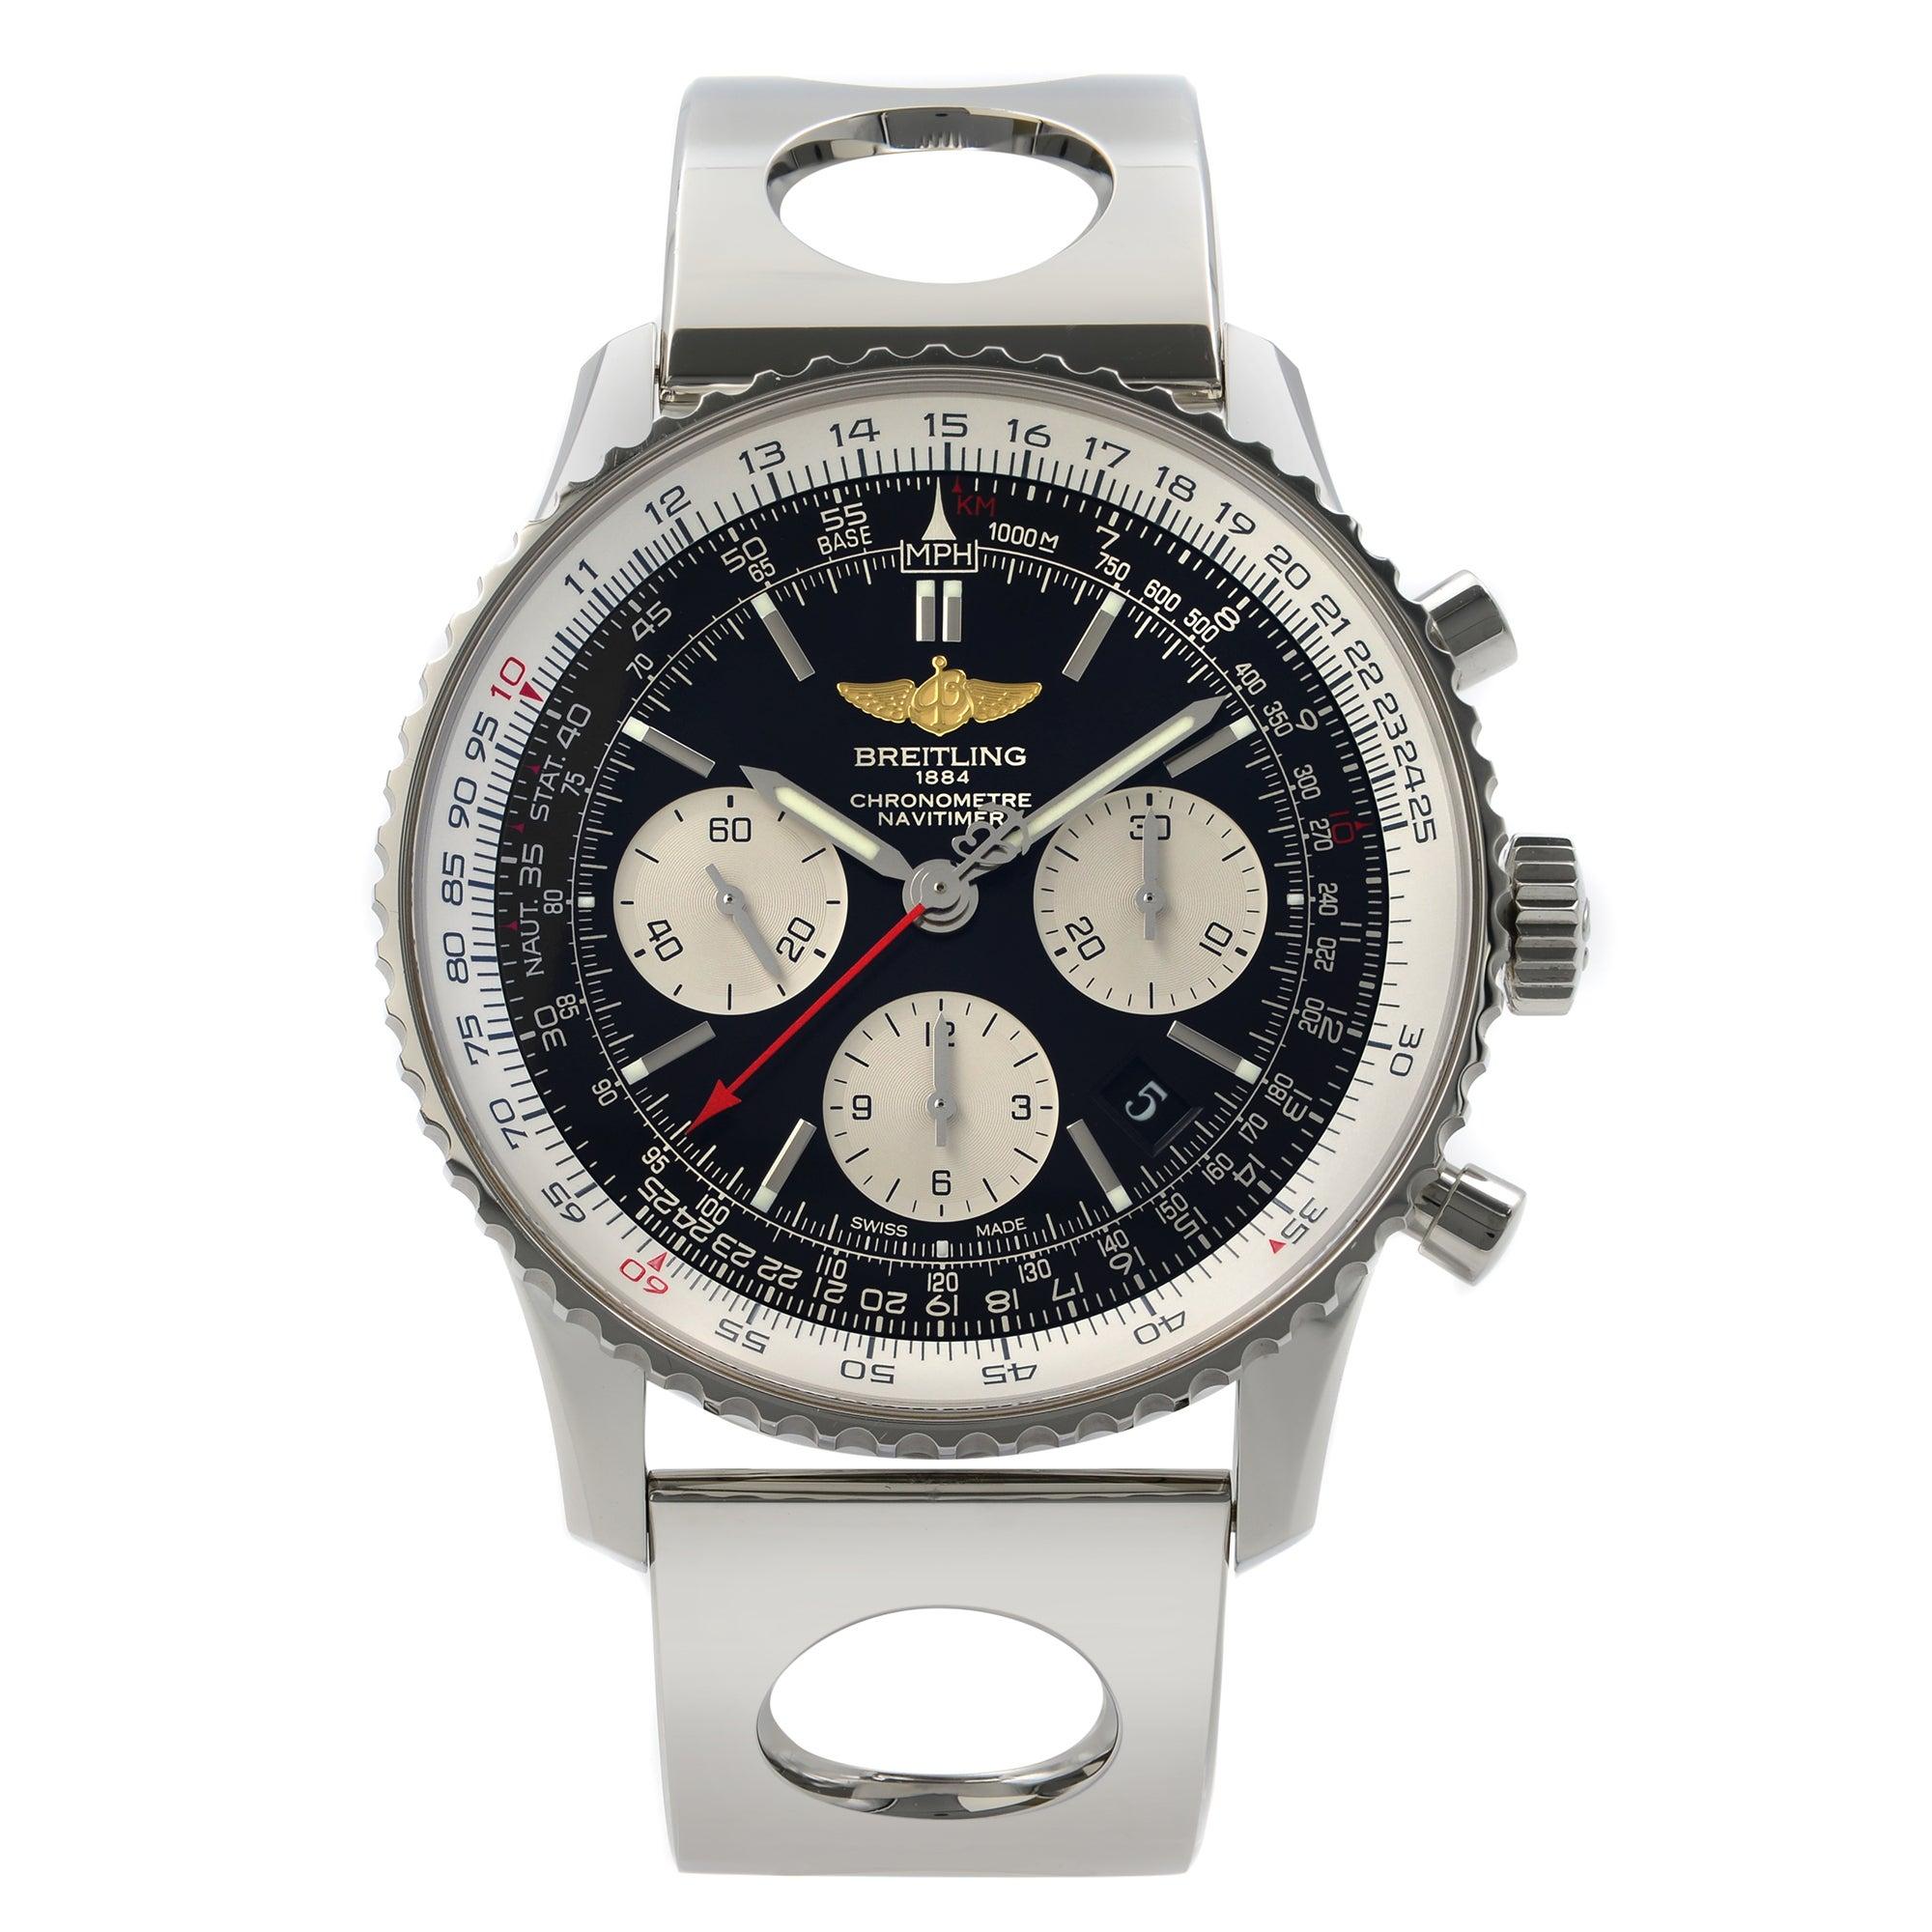 Breitling Navitimer 01 Steel Black Dial Automatic Men's Watch AB012012/BB01-222A